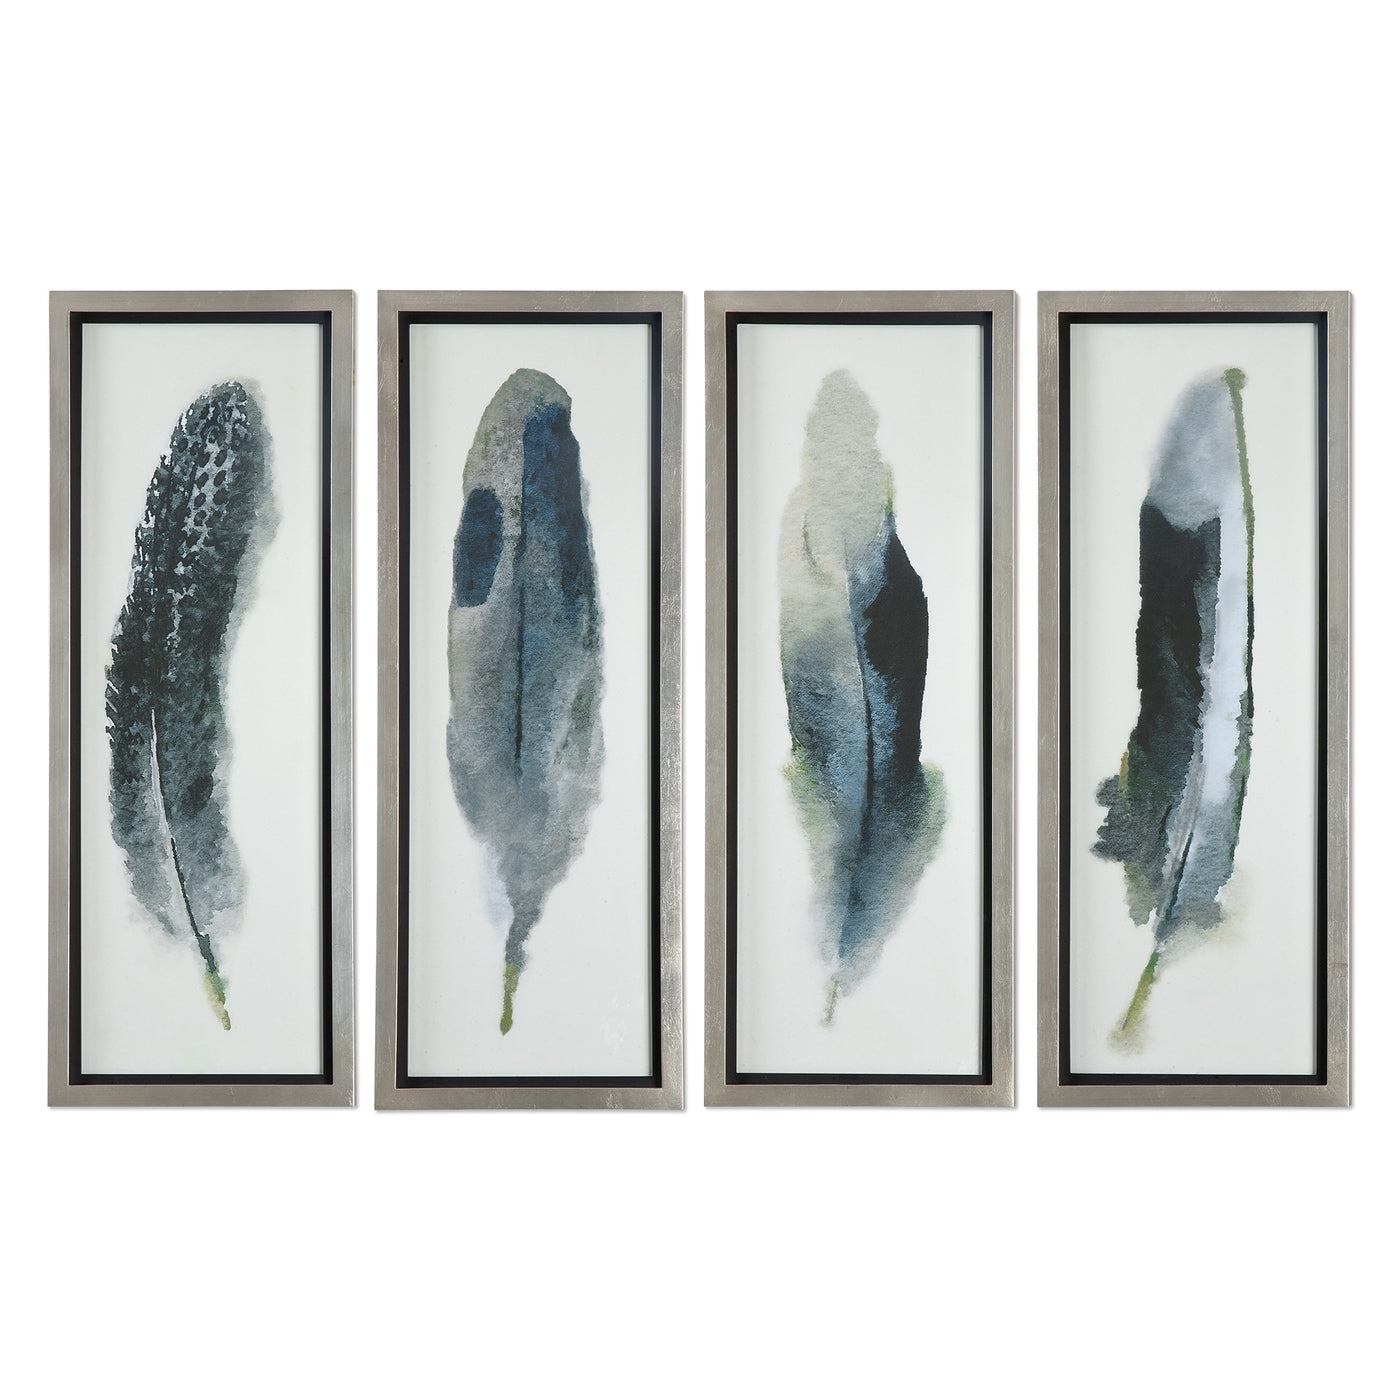 Dark Blue And Black Hues Against An Off-white Background Create A Striking Contrast In These Contemporary Feather Prints. ...